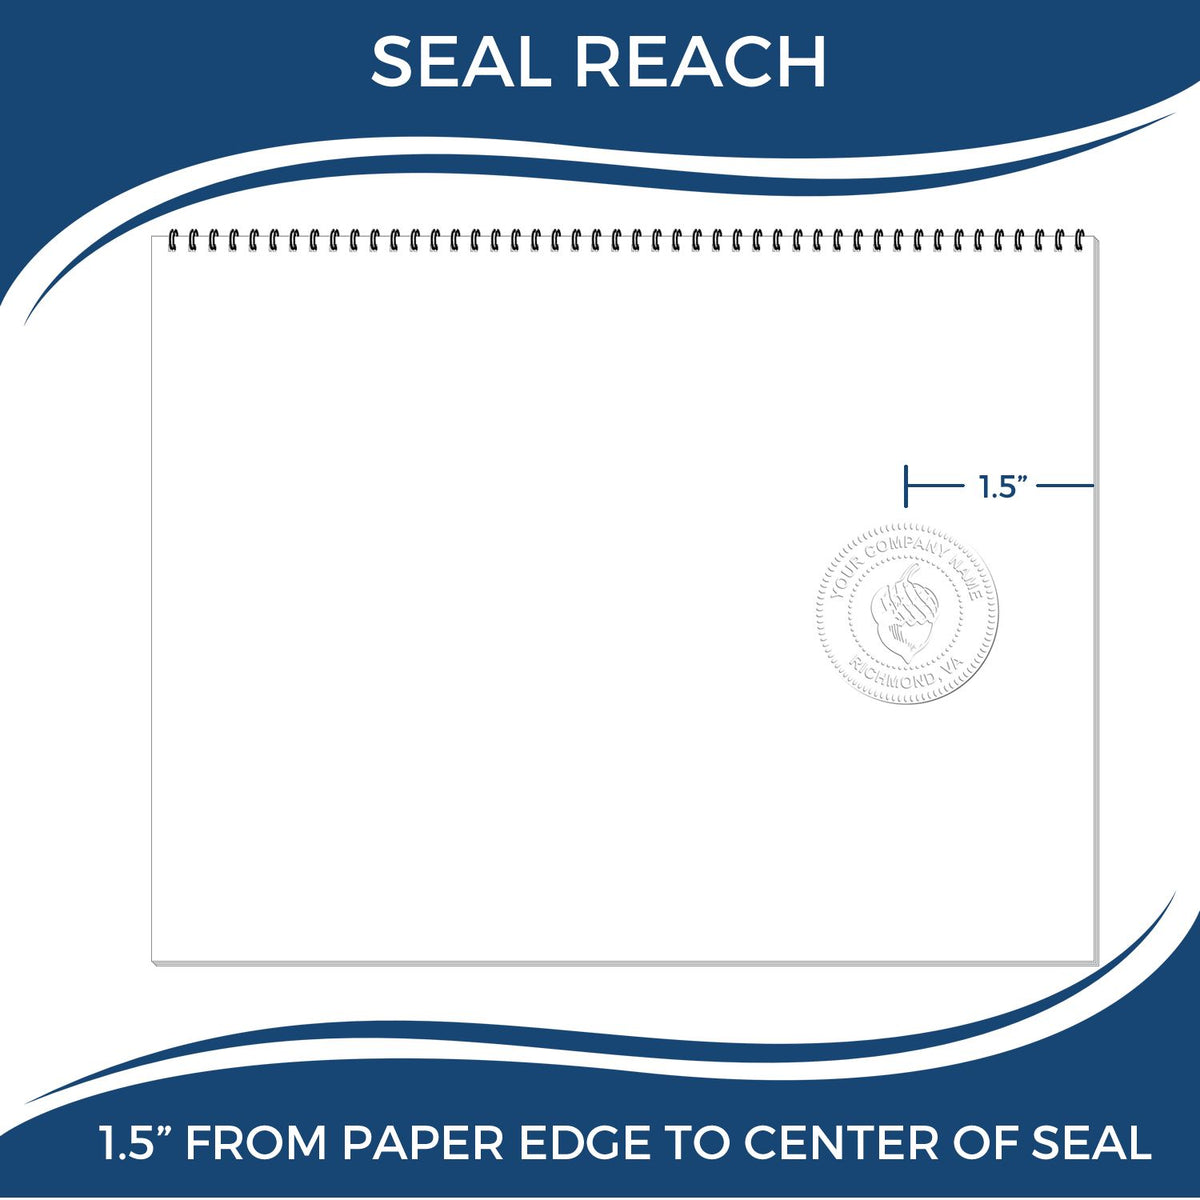 An infographic showing the seal reach which is represented by a ruler and a miniature seal image of the State of Kansas Architectural Seal Embosser